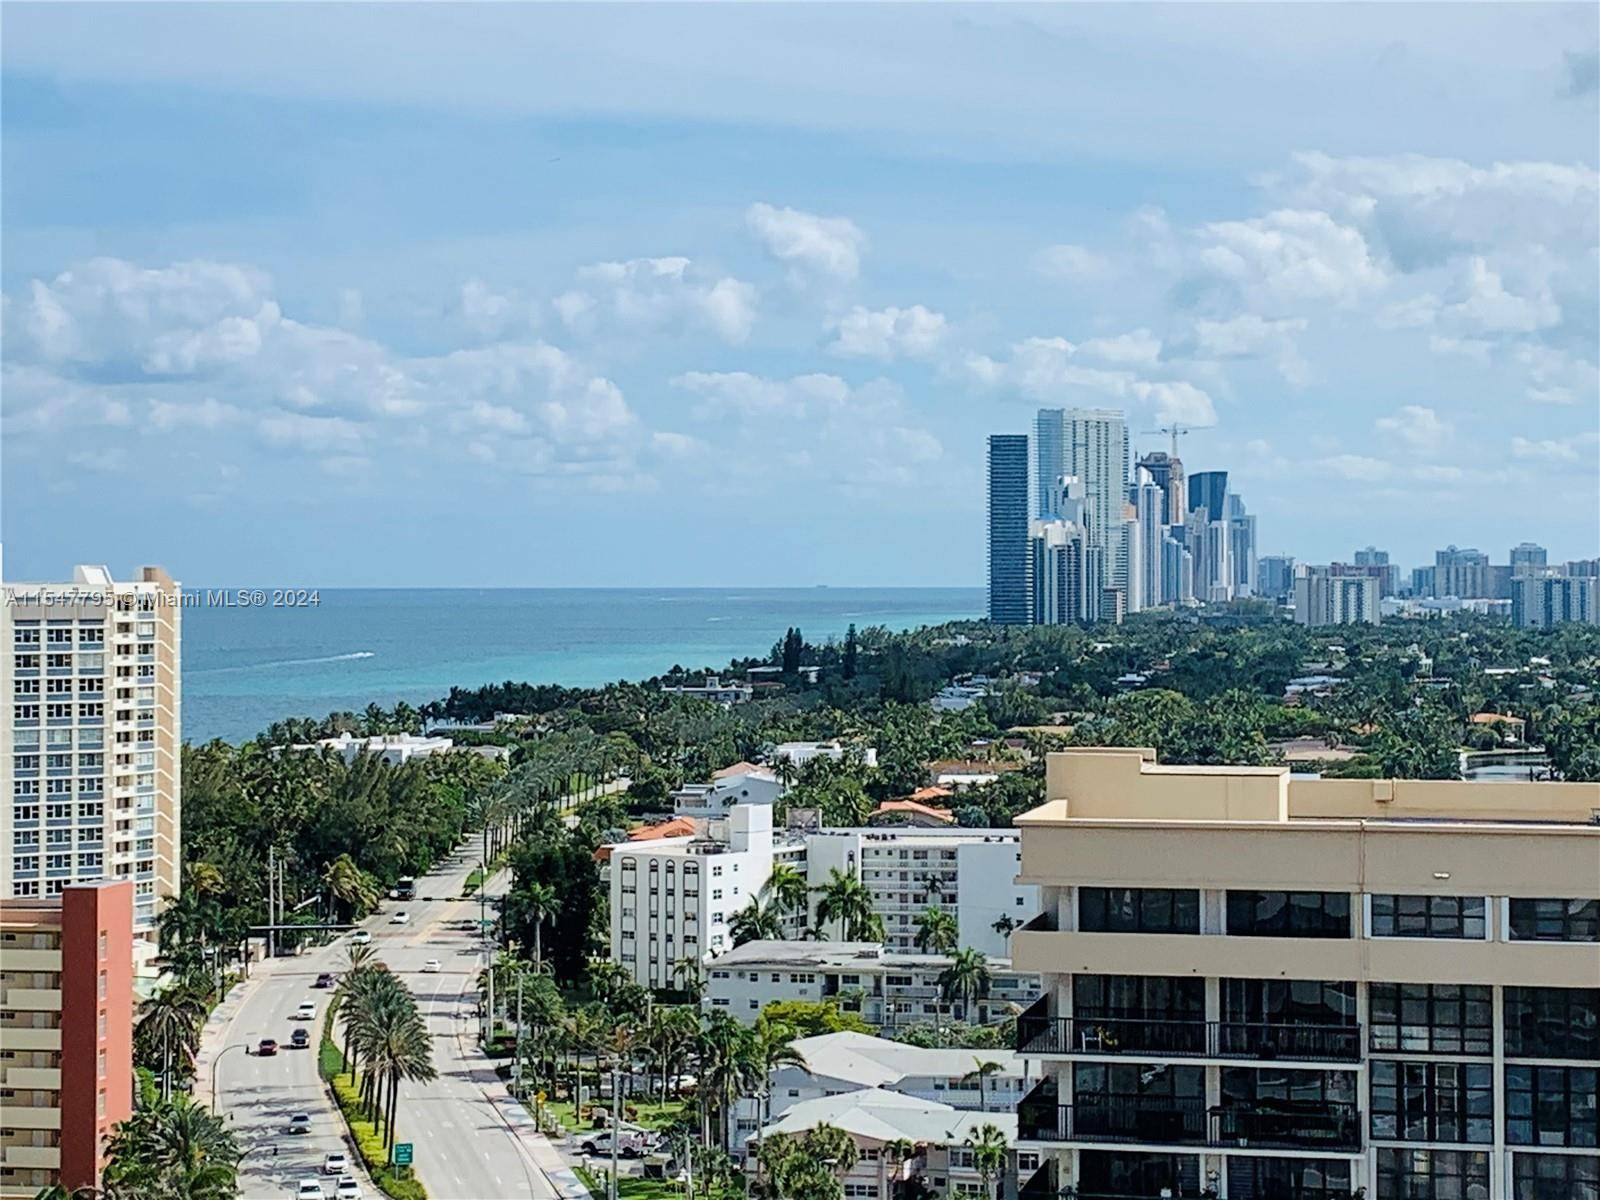 ENJOY RESORT STYLE LIVING AT THE HEMISPHERES ONE OF THE FINEST HIGH RISE BUILDING IN HALLANDALE BEACH WITH GREAT AMENITIES INCLUDING THE BEACH AND A MARINA.